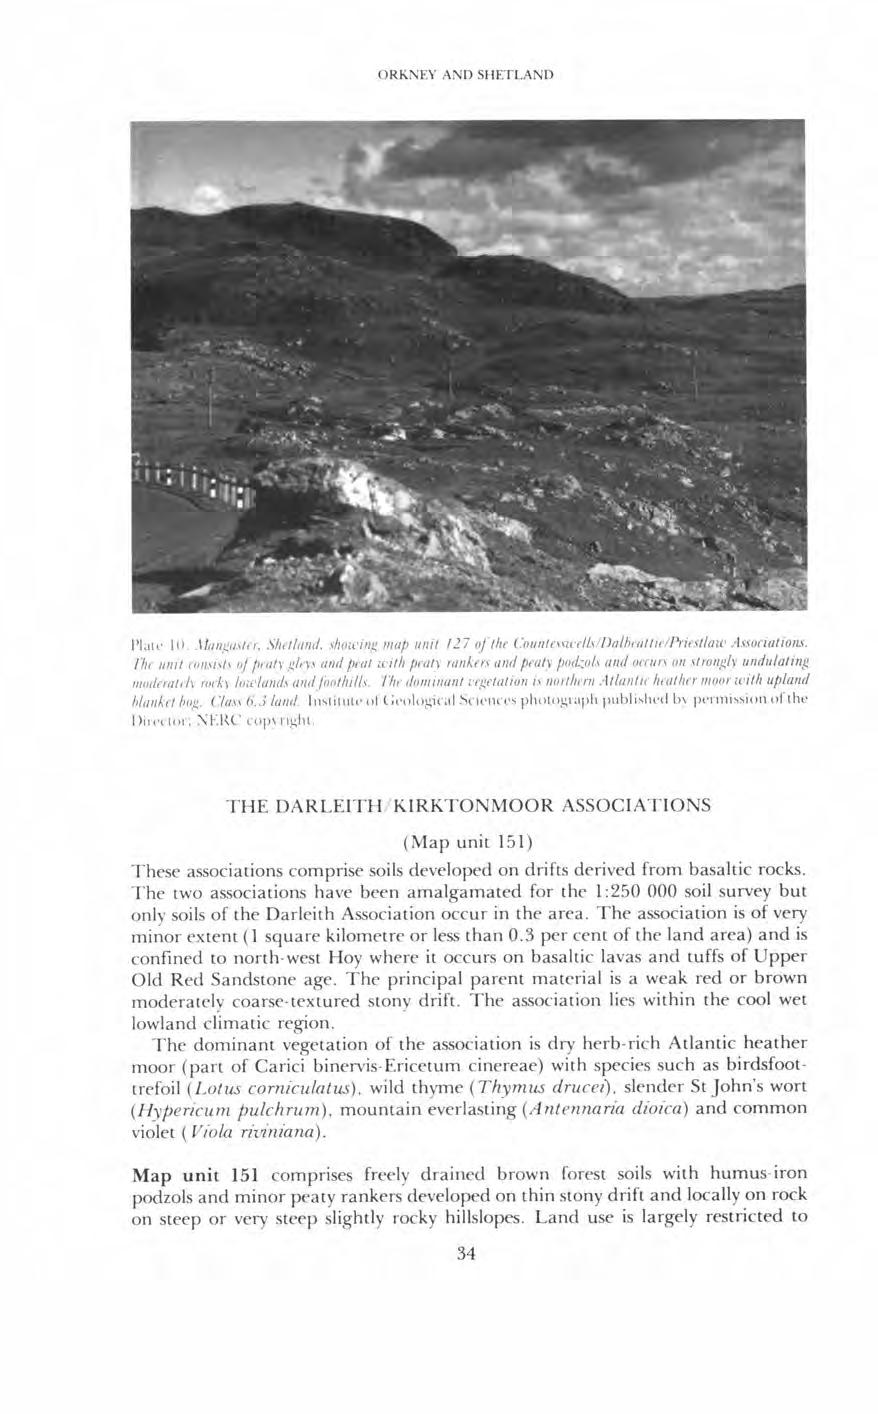 ORKNEY AND SHETLAND THE DARLEITH/KIRKTONMOOR ASSOCIATIONS (Map unit 151) These associations comprise soils developed on drifts derived from basaltic rocks.